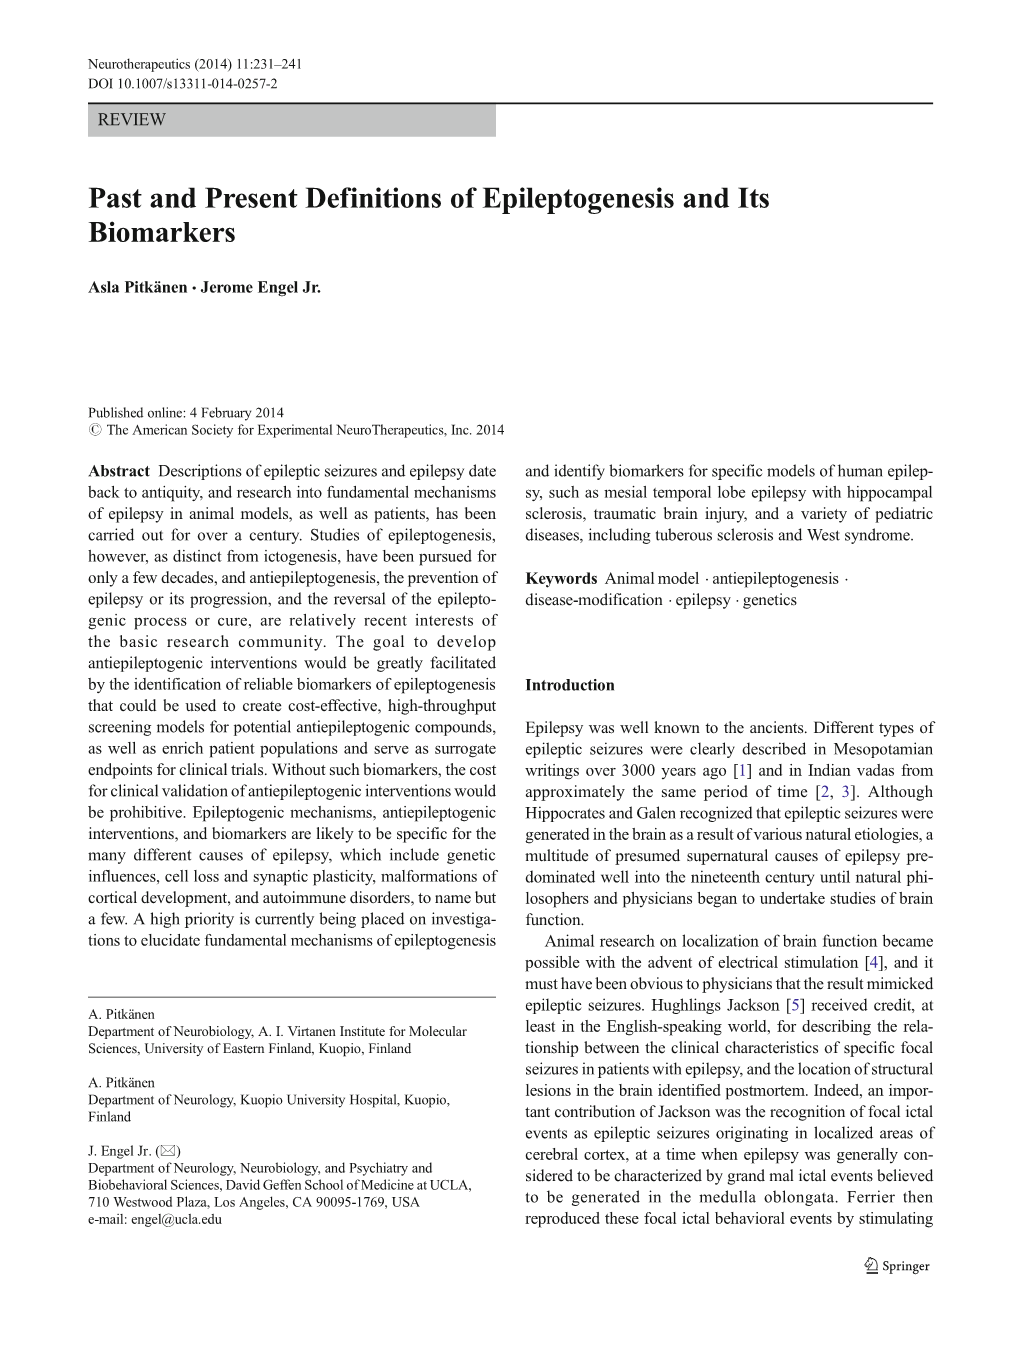 Past and Present Definitions of Epileptogenesis and Its Biomarkers